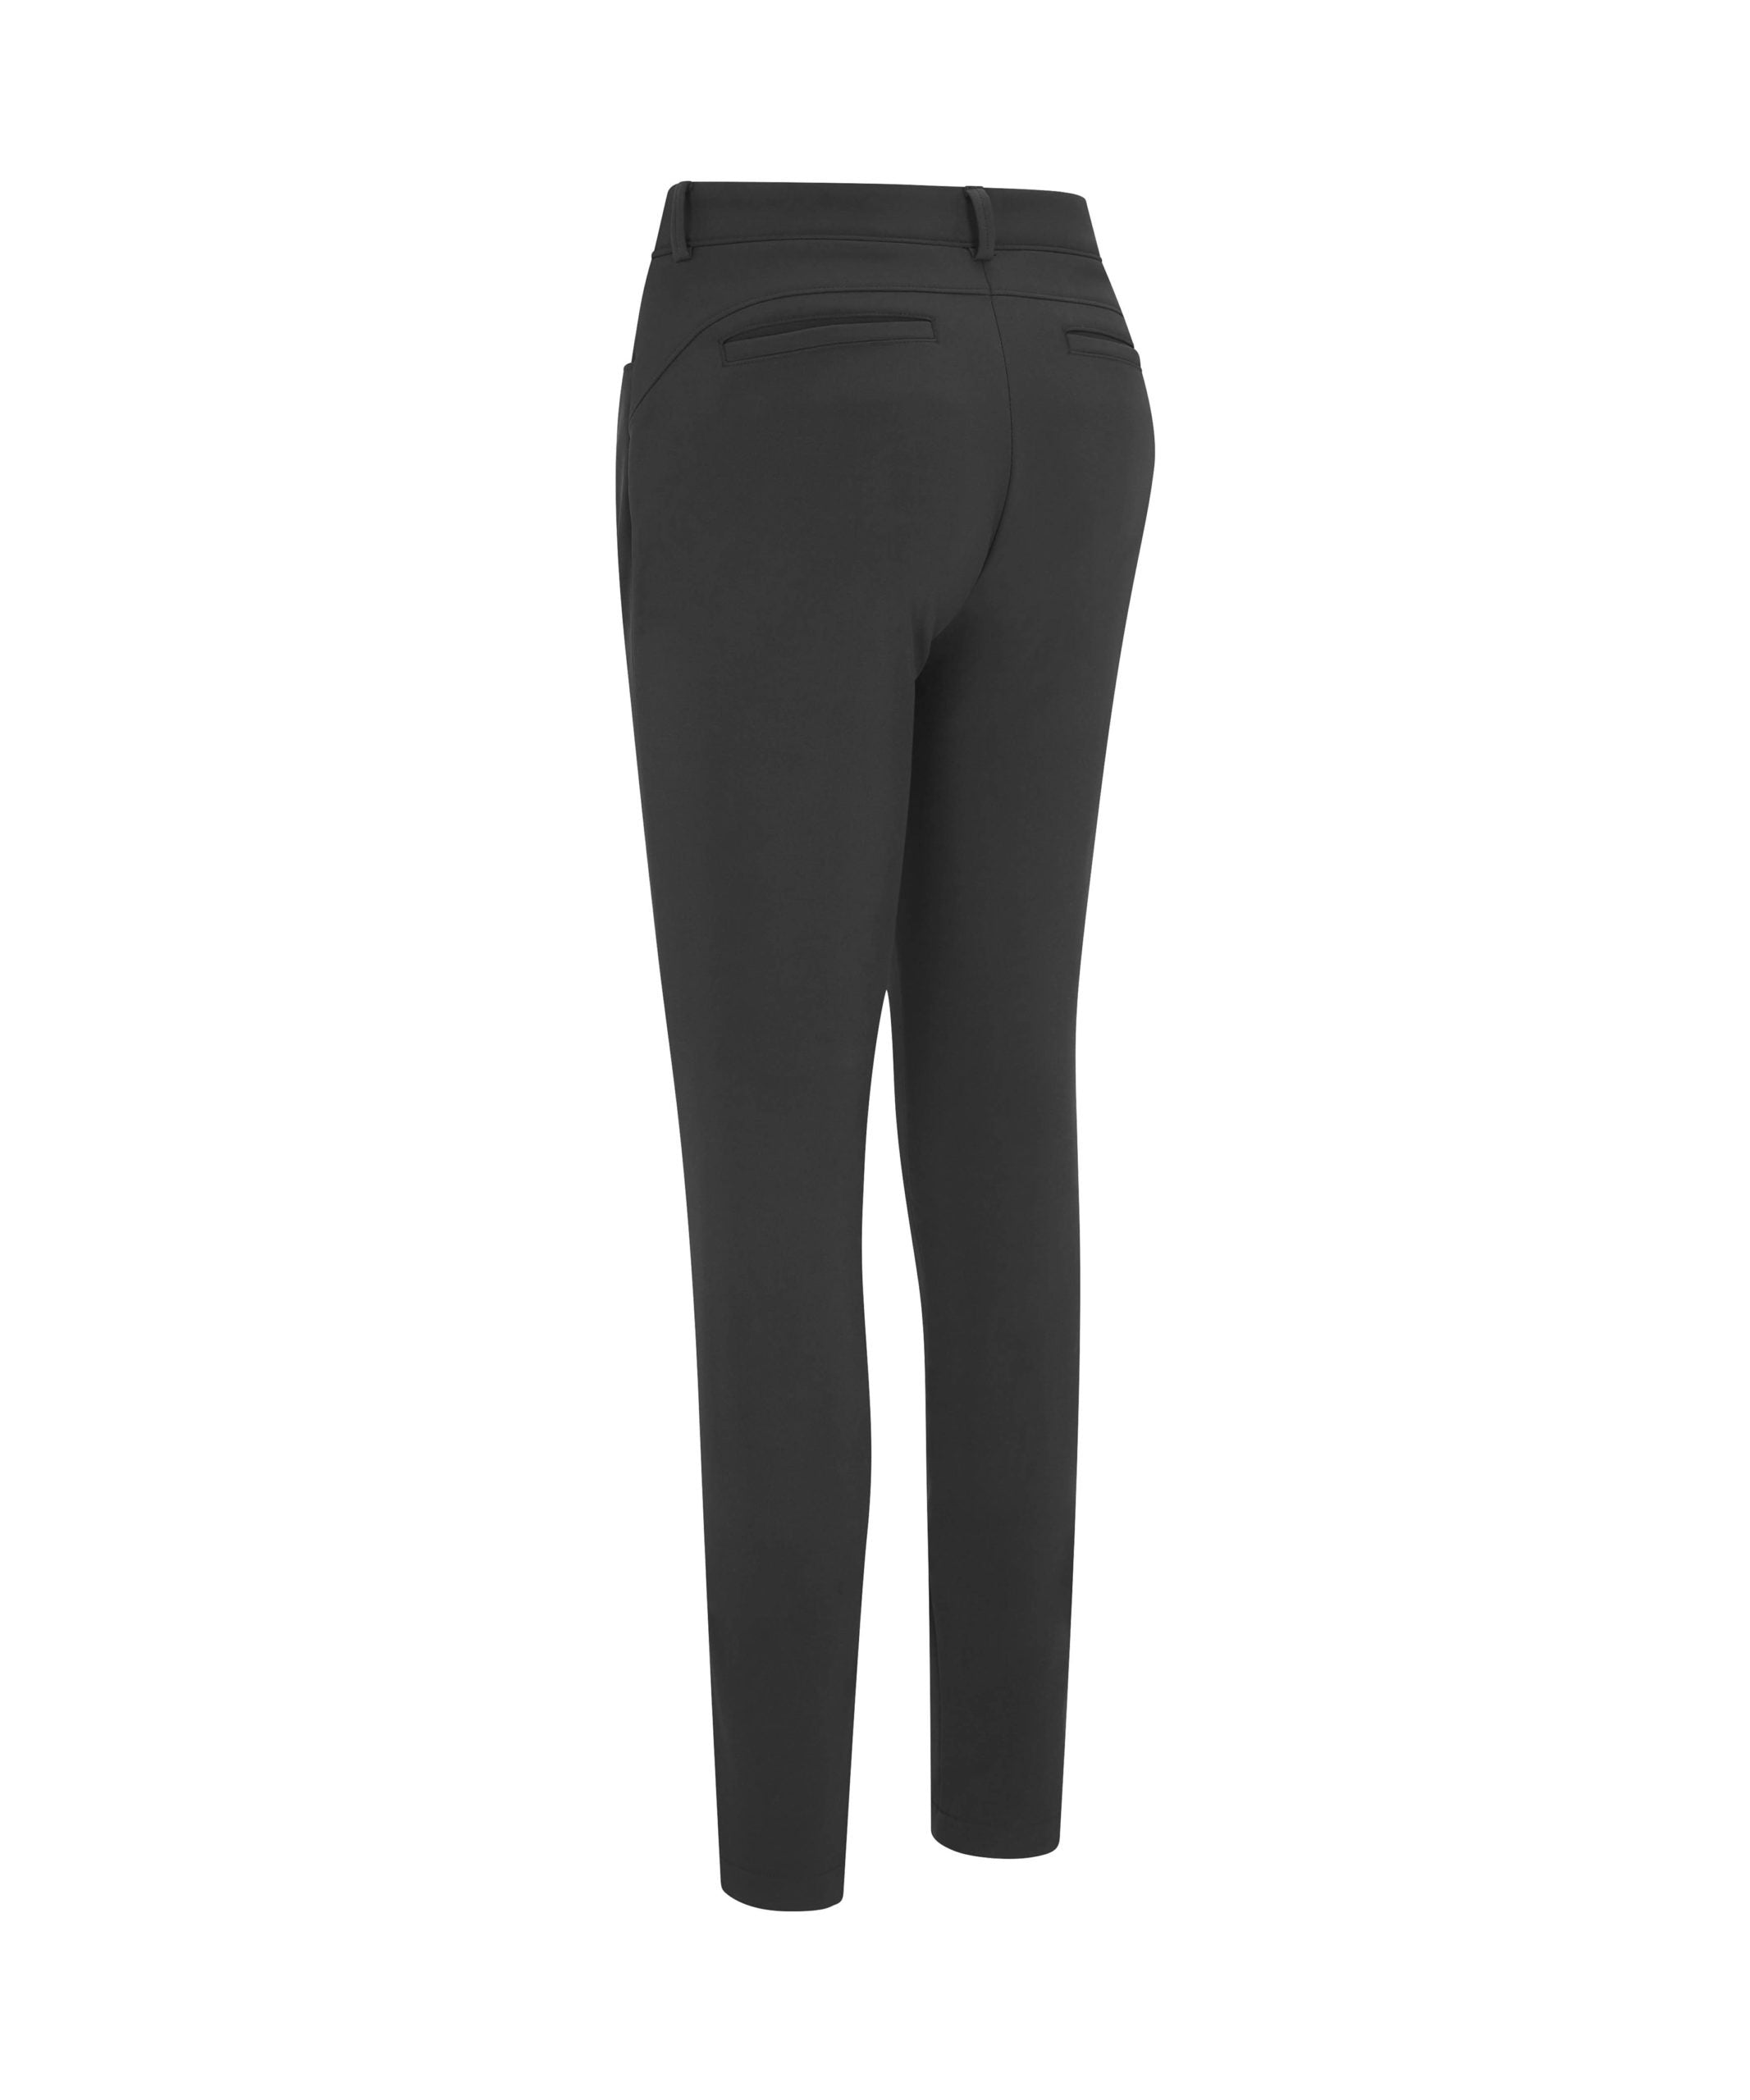 View Thermal Trousers In Caviar Caviar L 29 information